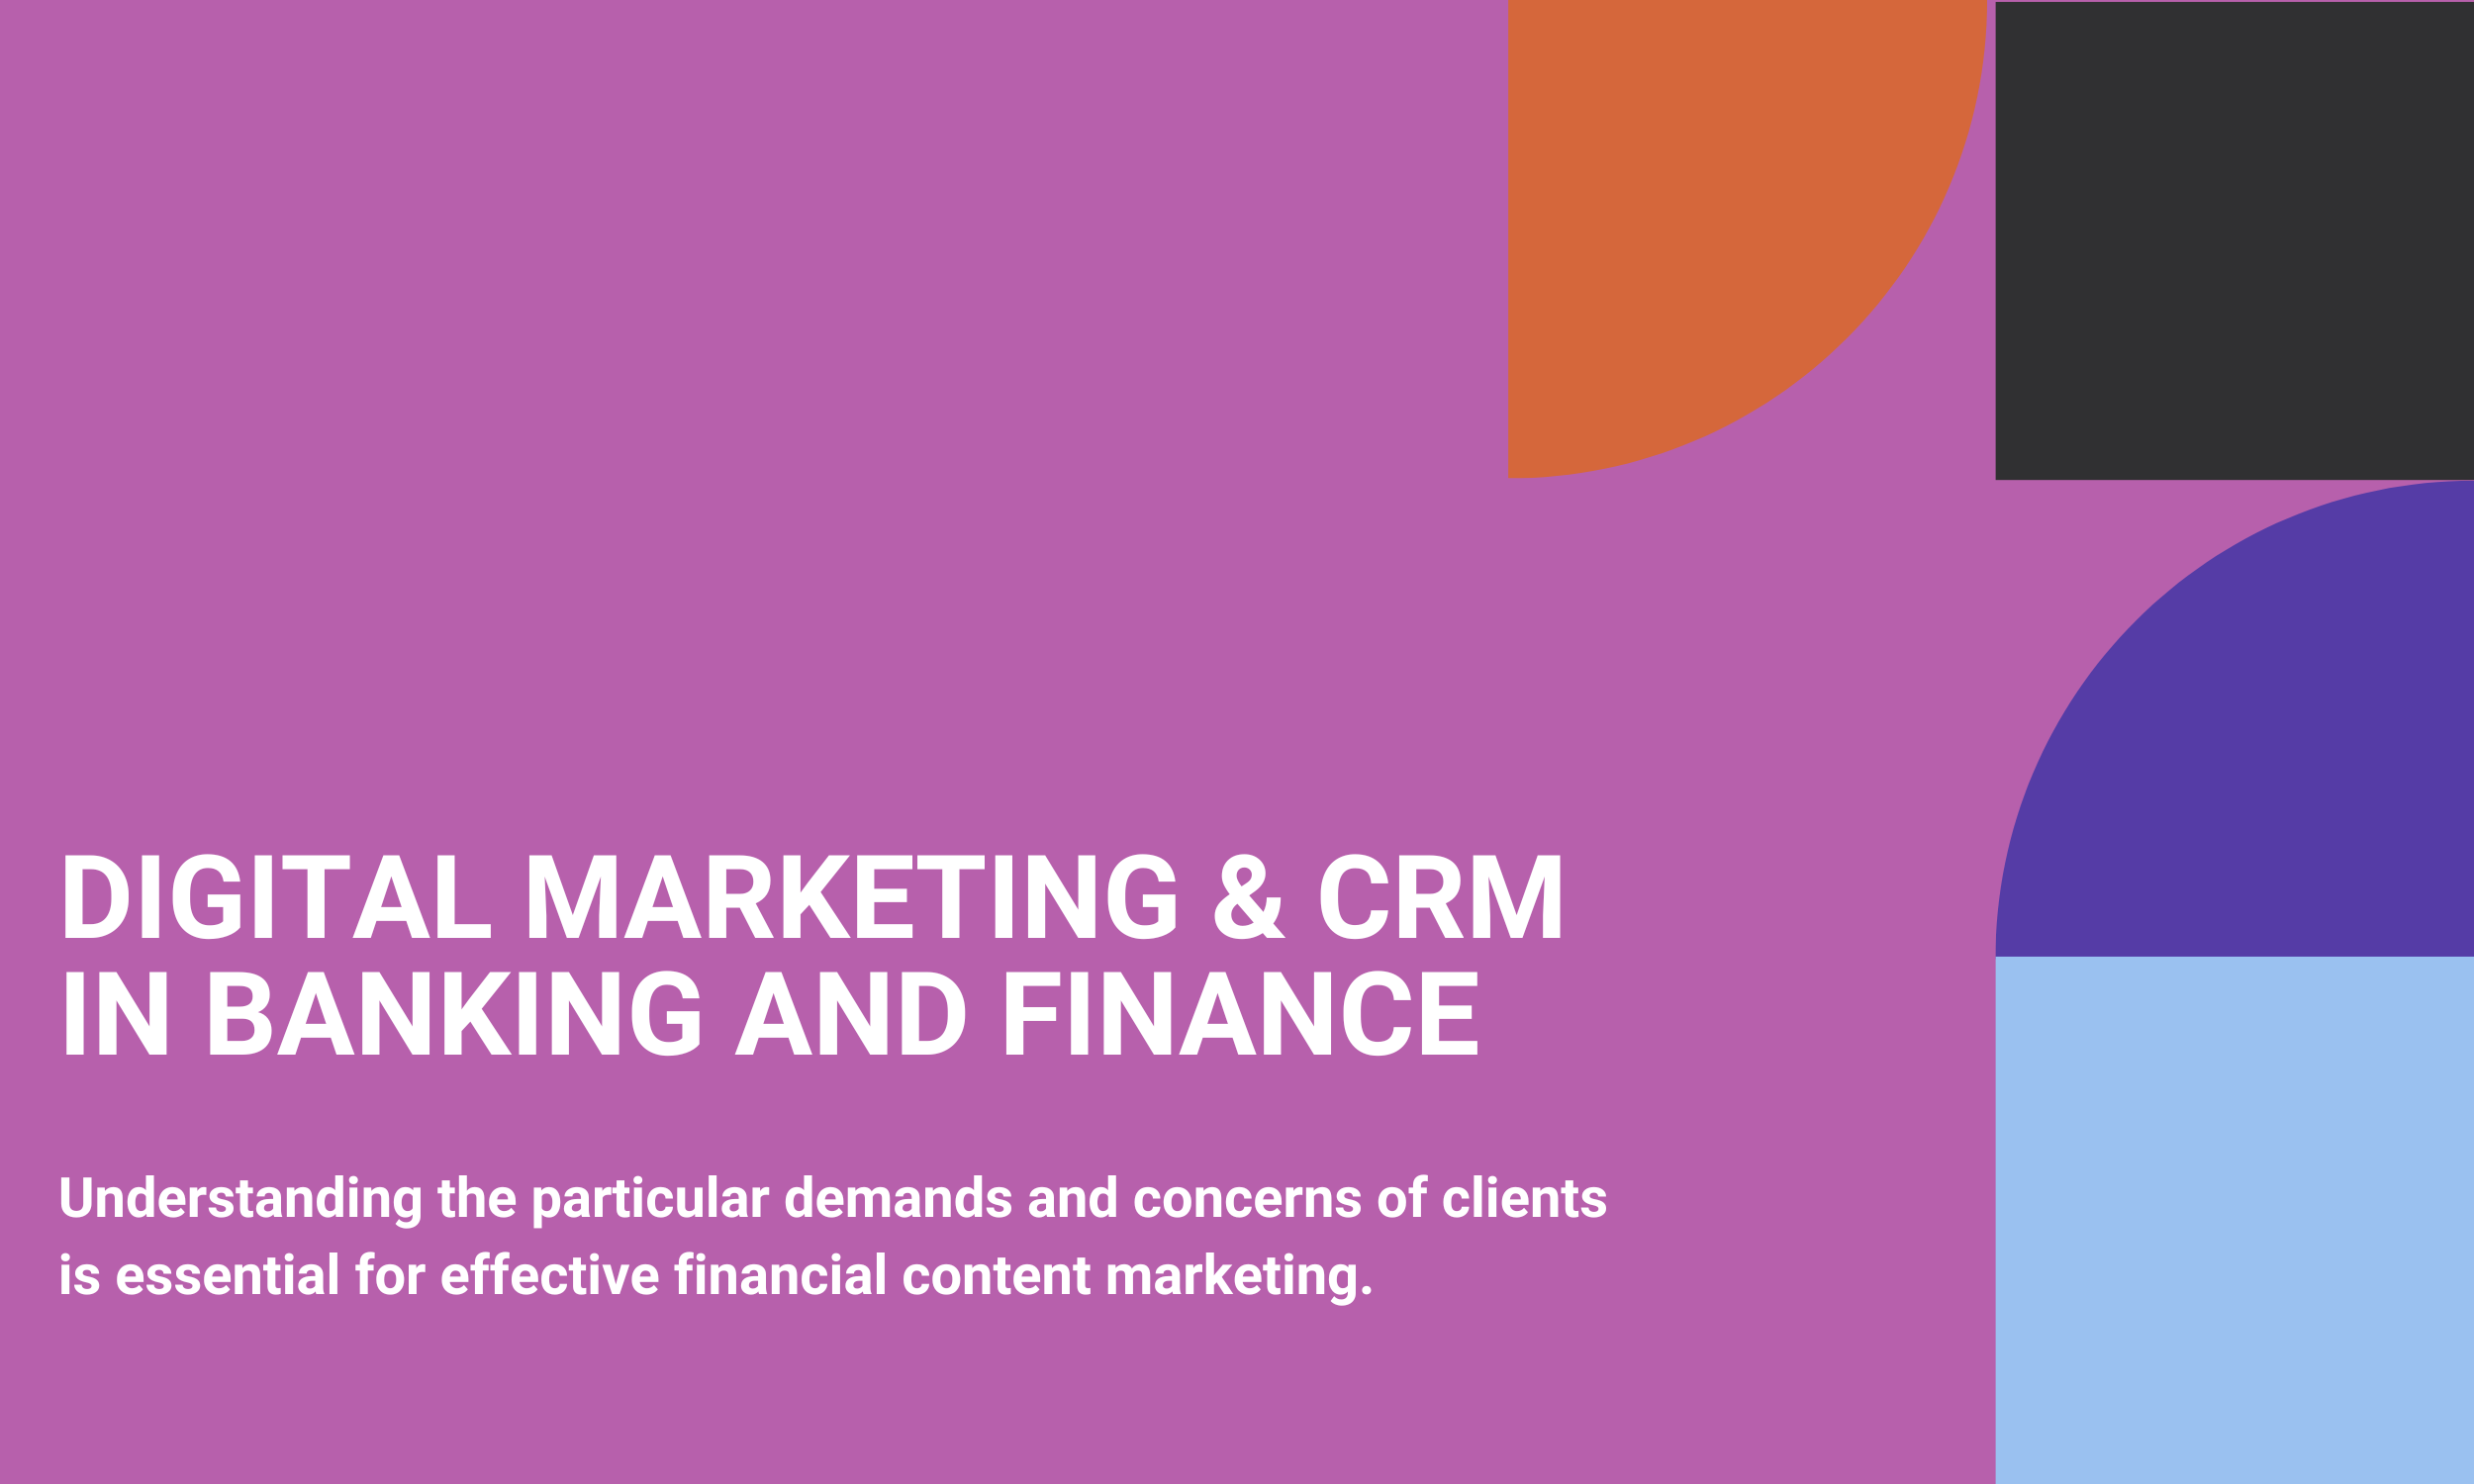 Digital Marketing & CRM in Banking and Finance